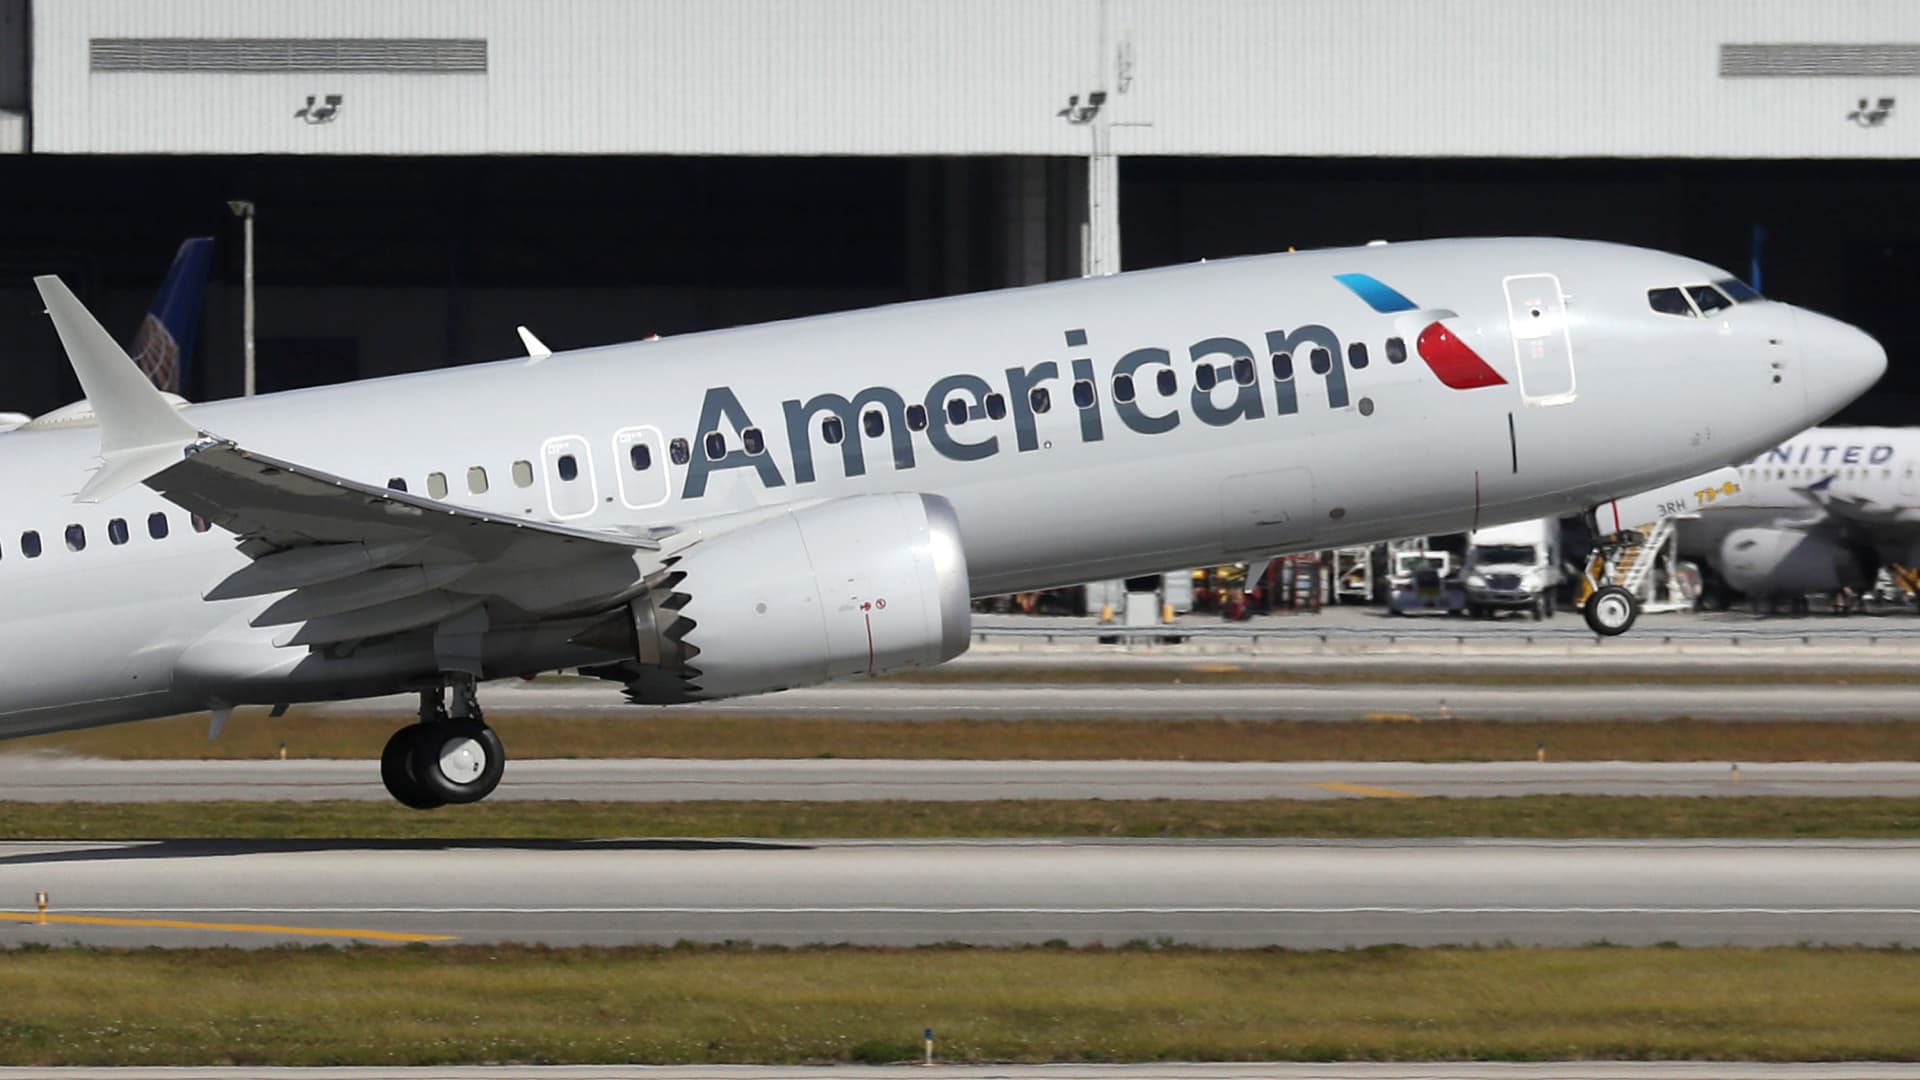 American orders 260 new planes, including Boeing Max 10s, and plans bigger first class